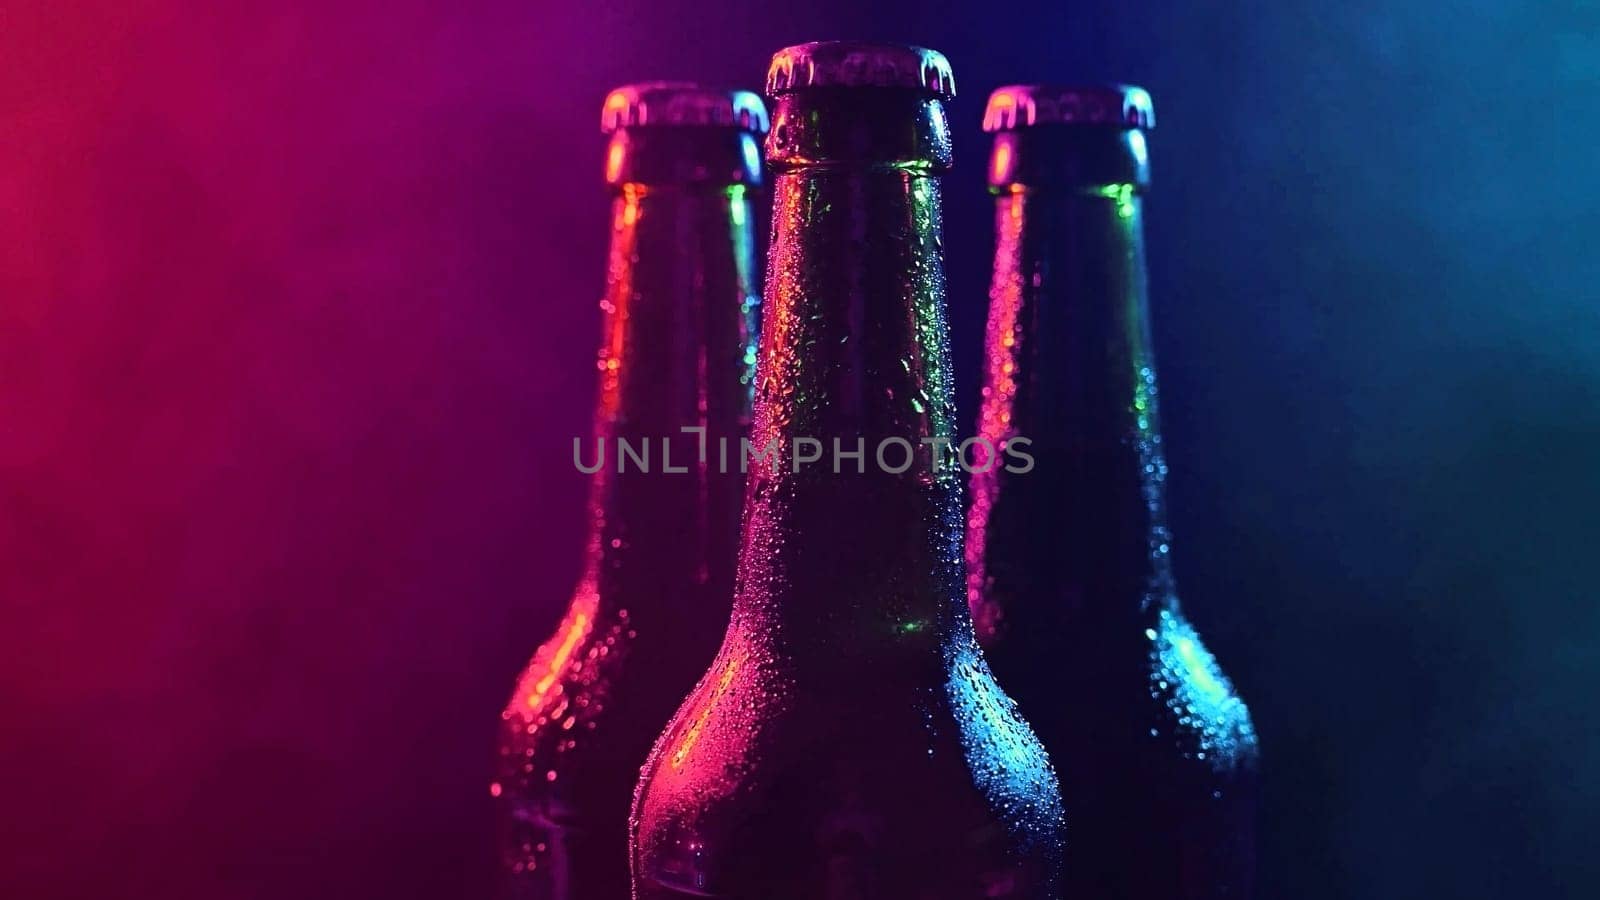 Three bottles of beer spinning in blue pink fog. by mrwed54